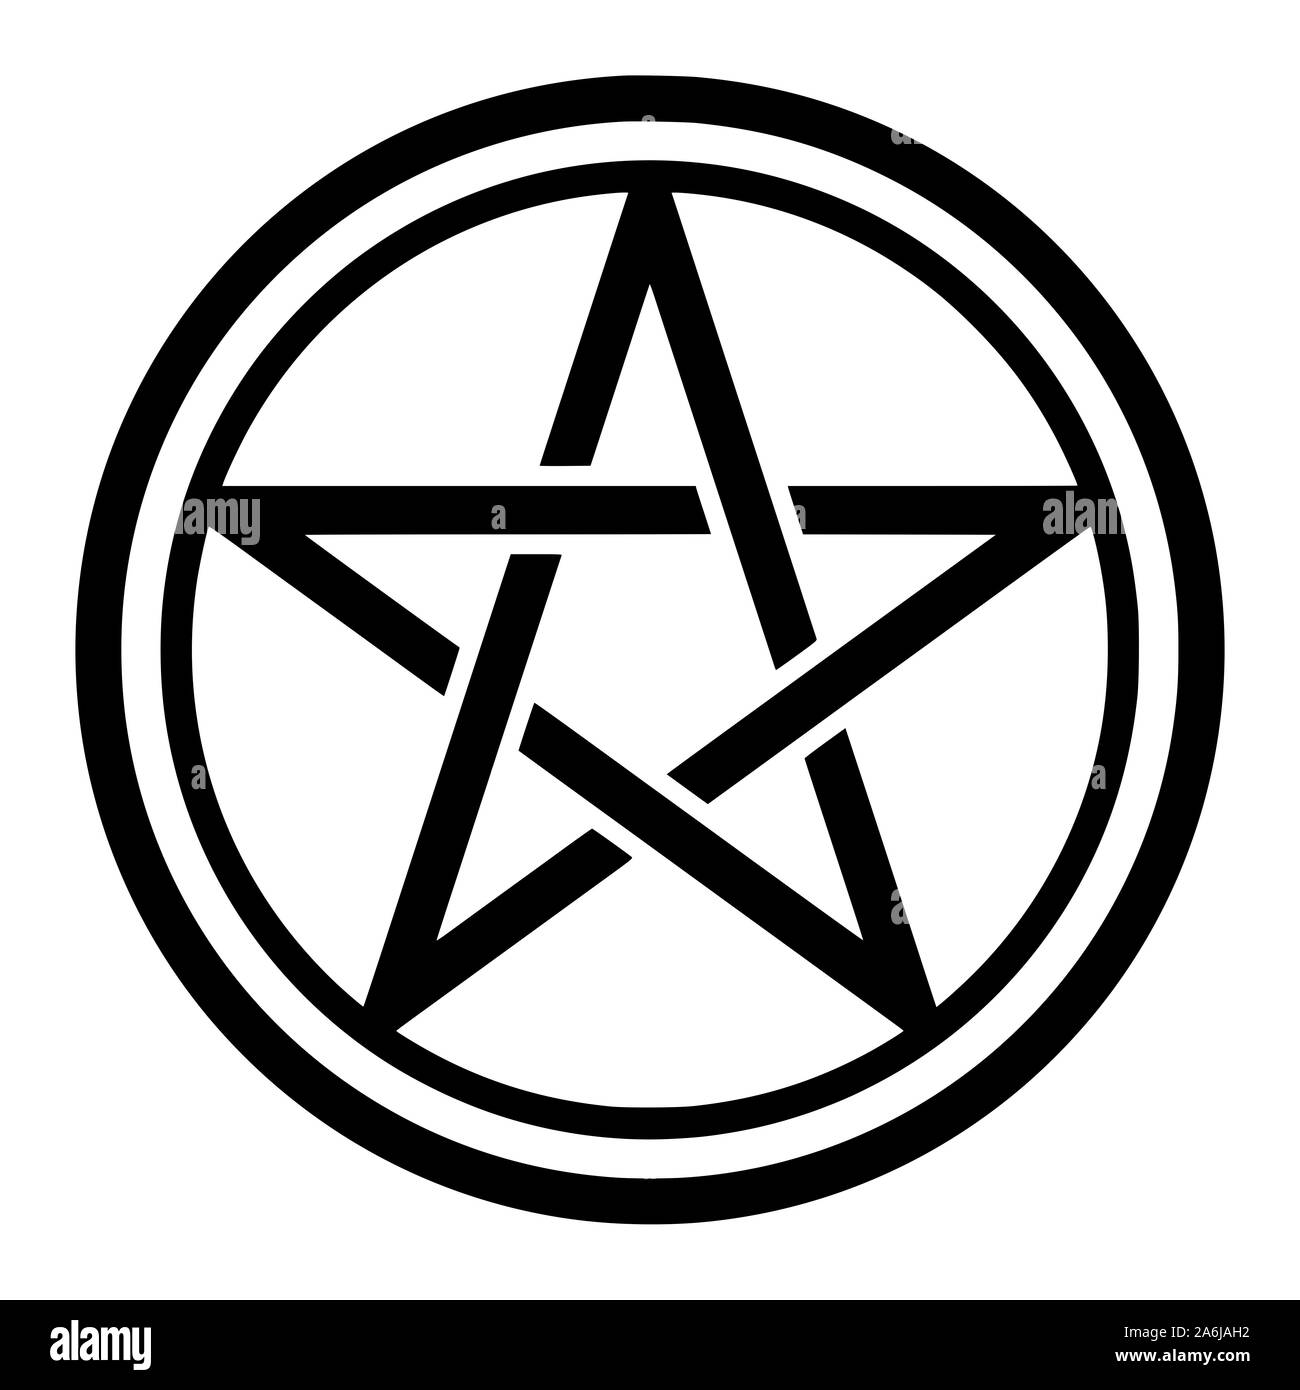 Pentacle symbol icon in a circle Stock Photo